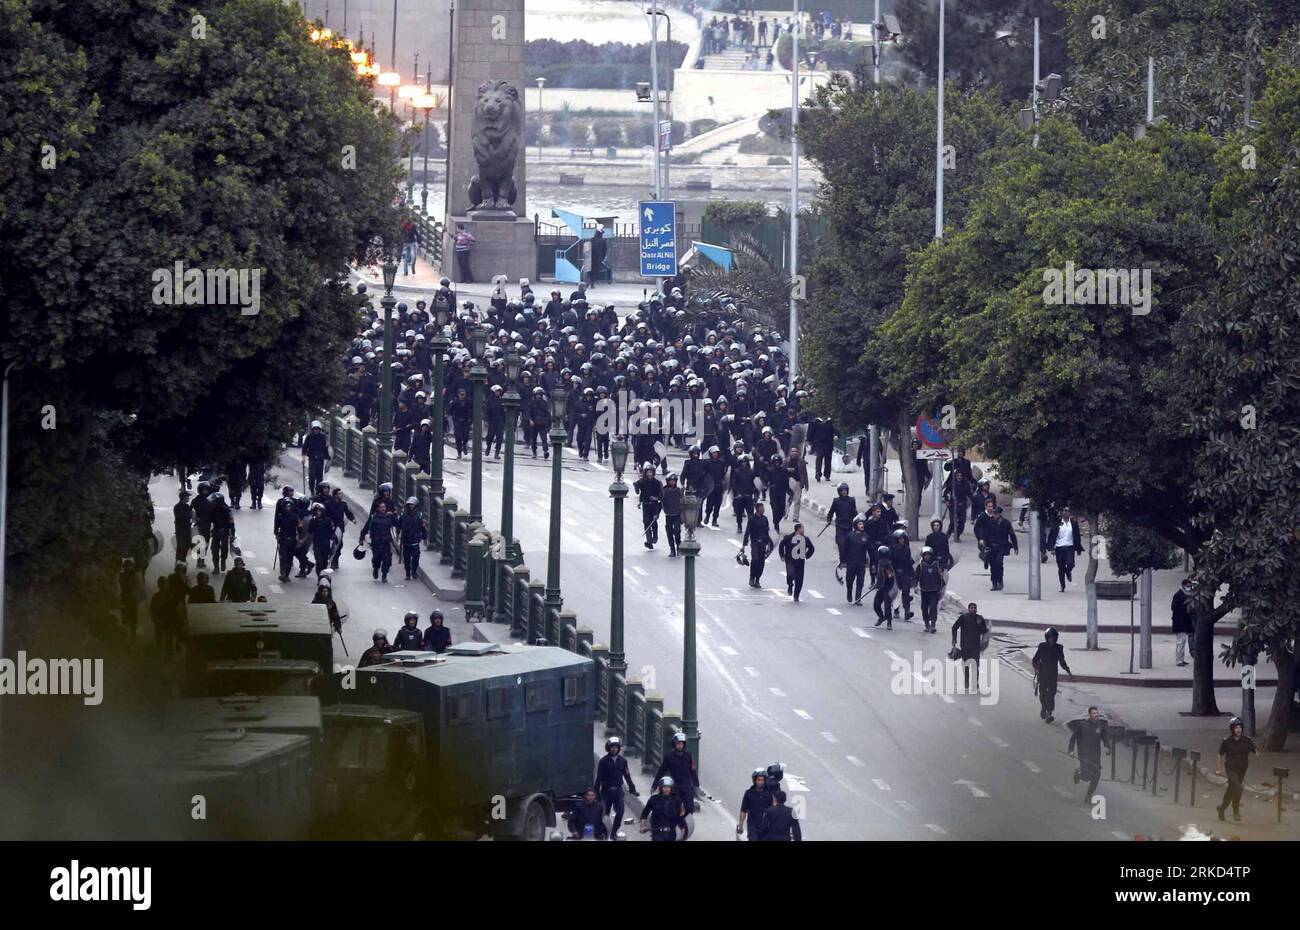 Bildnummer: 54861379  Datum: 29.01.2011  Copyright: imago/Xinhua CAIRO, Jan. 29, 2011 (Xinhua) -- Police try to control the situation during a protest on liberation square in Cairo, Egypt, Jan. 28, 2011. Mass protests against the government continued across Egypt on Friday. Internet service has been shut down in Cairo since midnight Friday as protestors are reportedly planning massive gatherings after prayers. Mobile phone communication was also disrupted on Friday morning. (Xinhua/Cai Yang)(xhn) EGYPT-CAIRO-PROTEST PUBLICATIONxNOTxINxCHN Gesellschaft Politik Unruhen Aufstand Ausschreitungen k Stock Photo